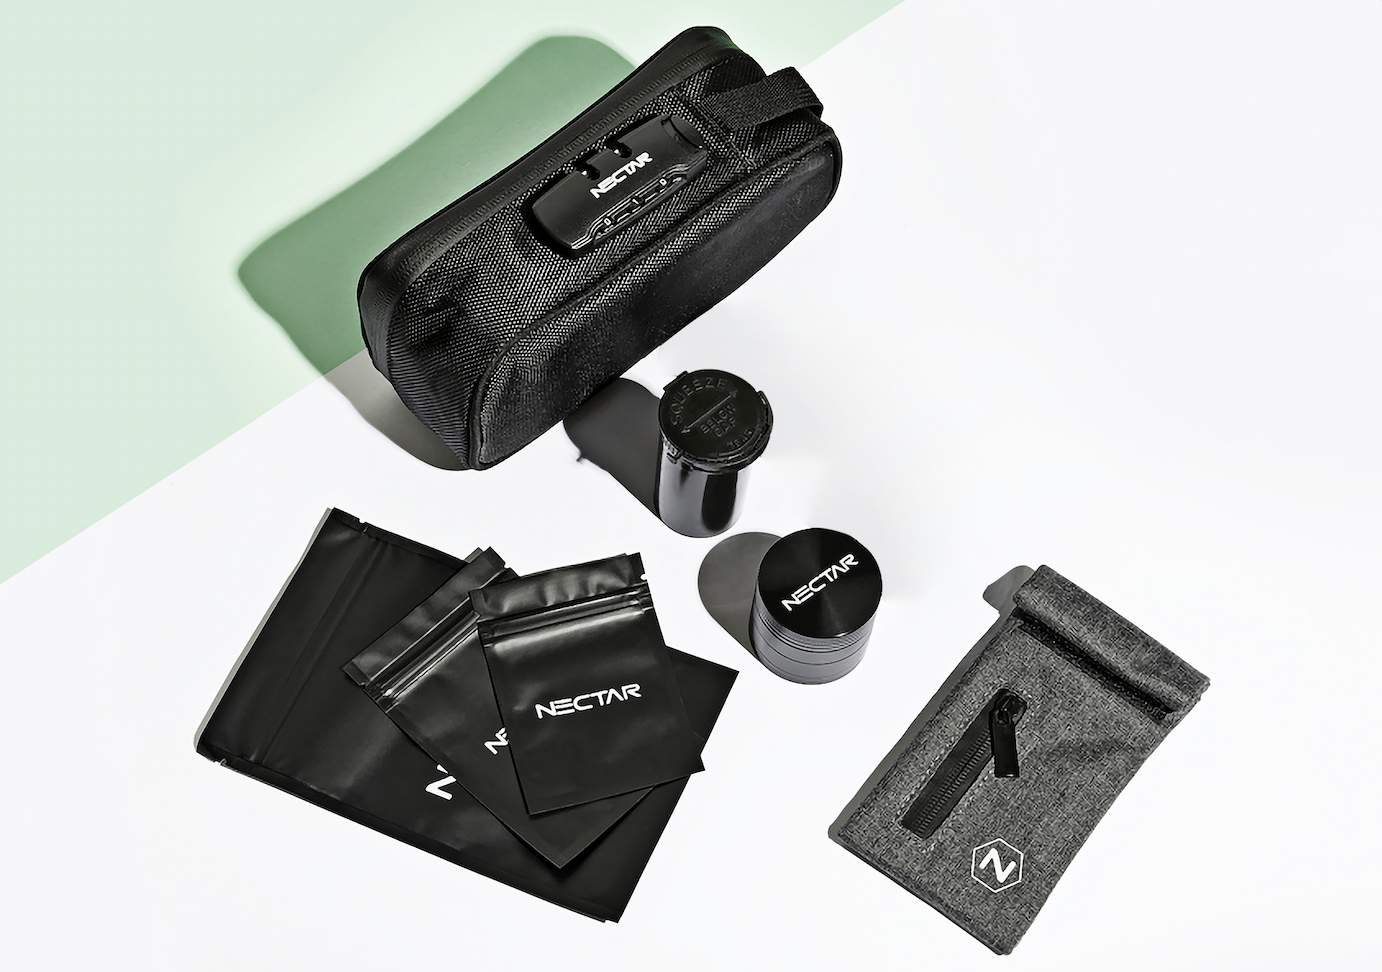 Nectar-Smell Proof Bag and Accessories